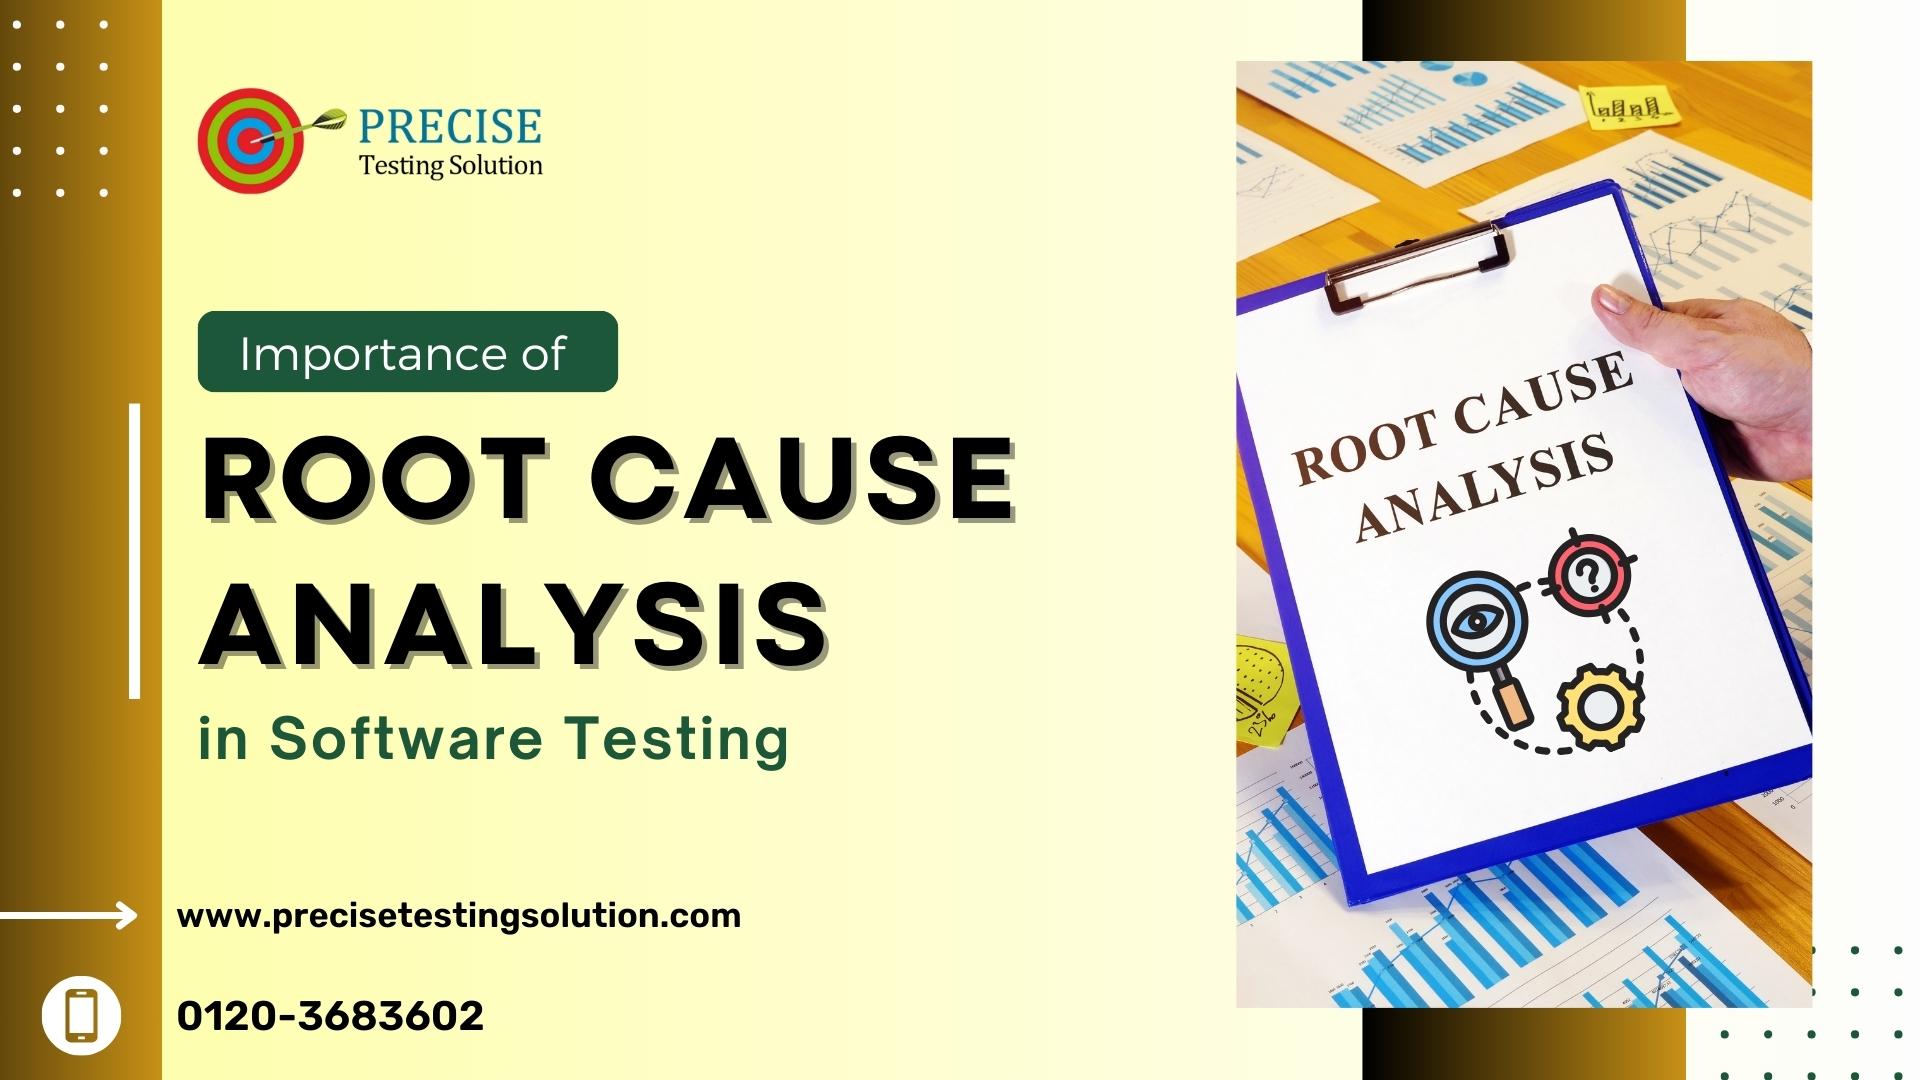 Importance of Root Cause Analysis in Software Testing